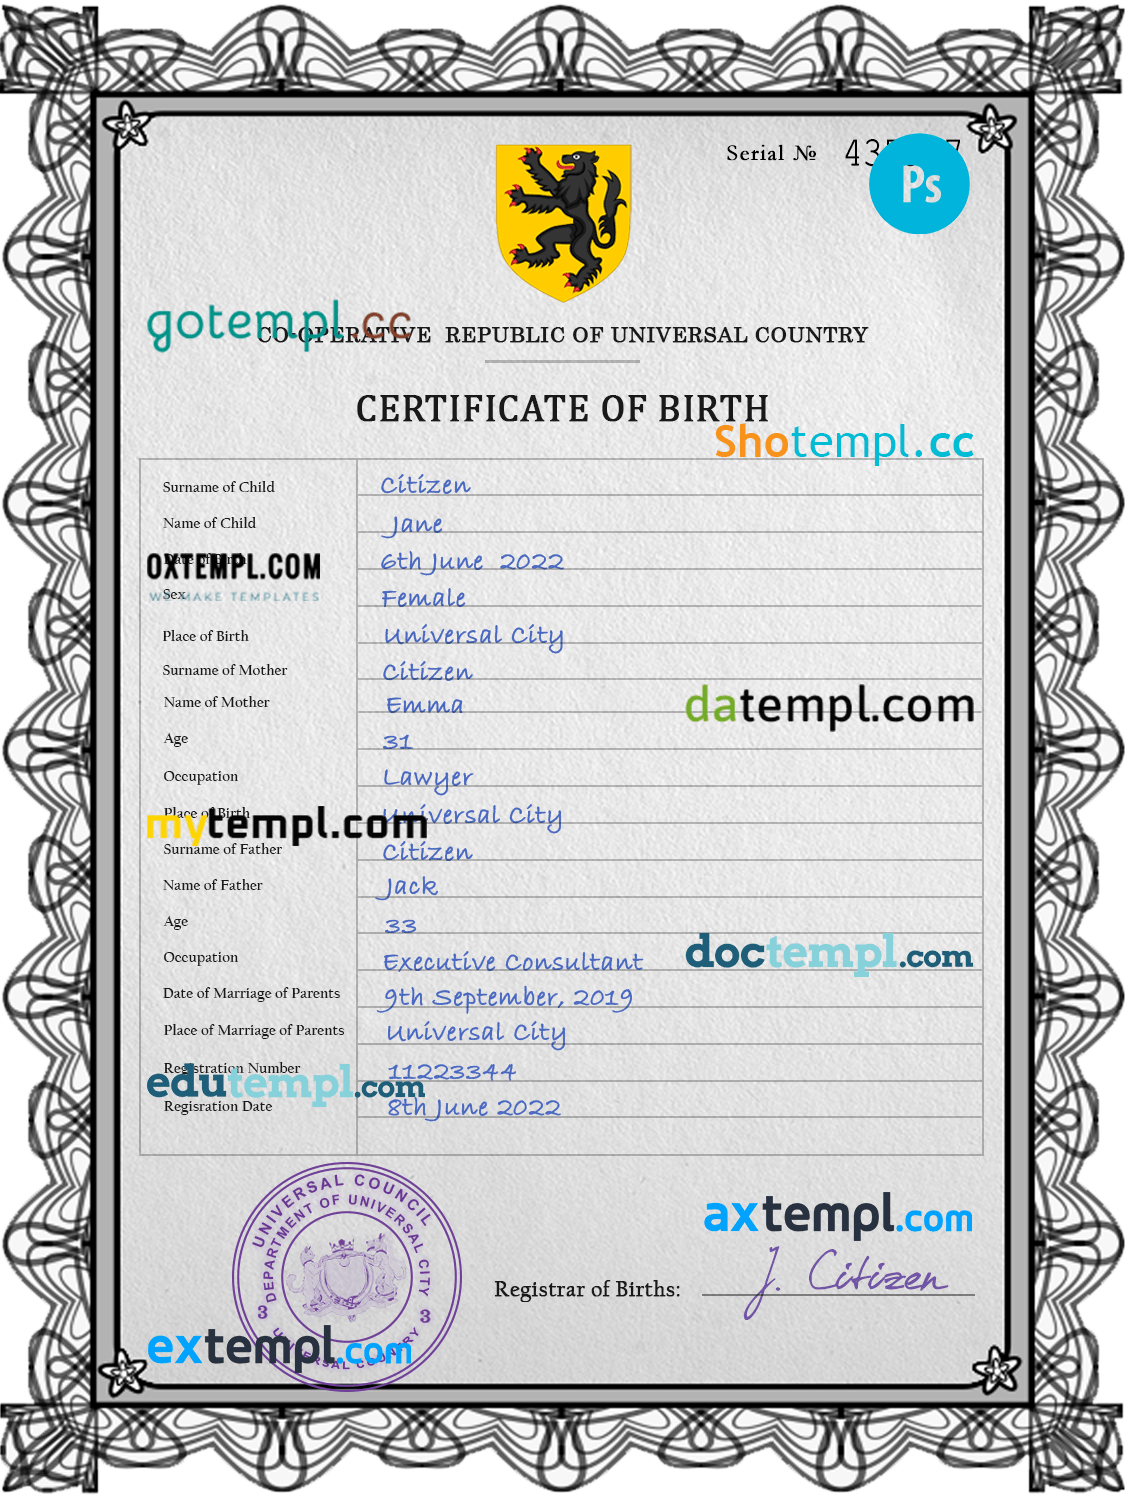 # trident universal birth certificate PSD template, fully editable